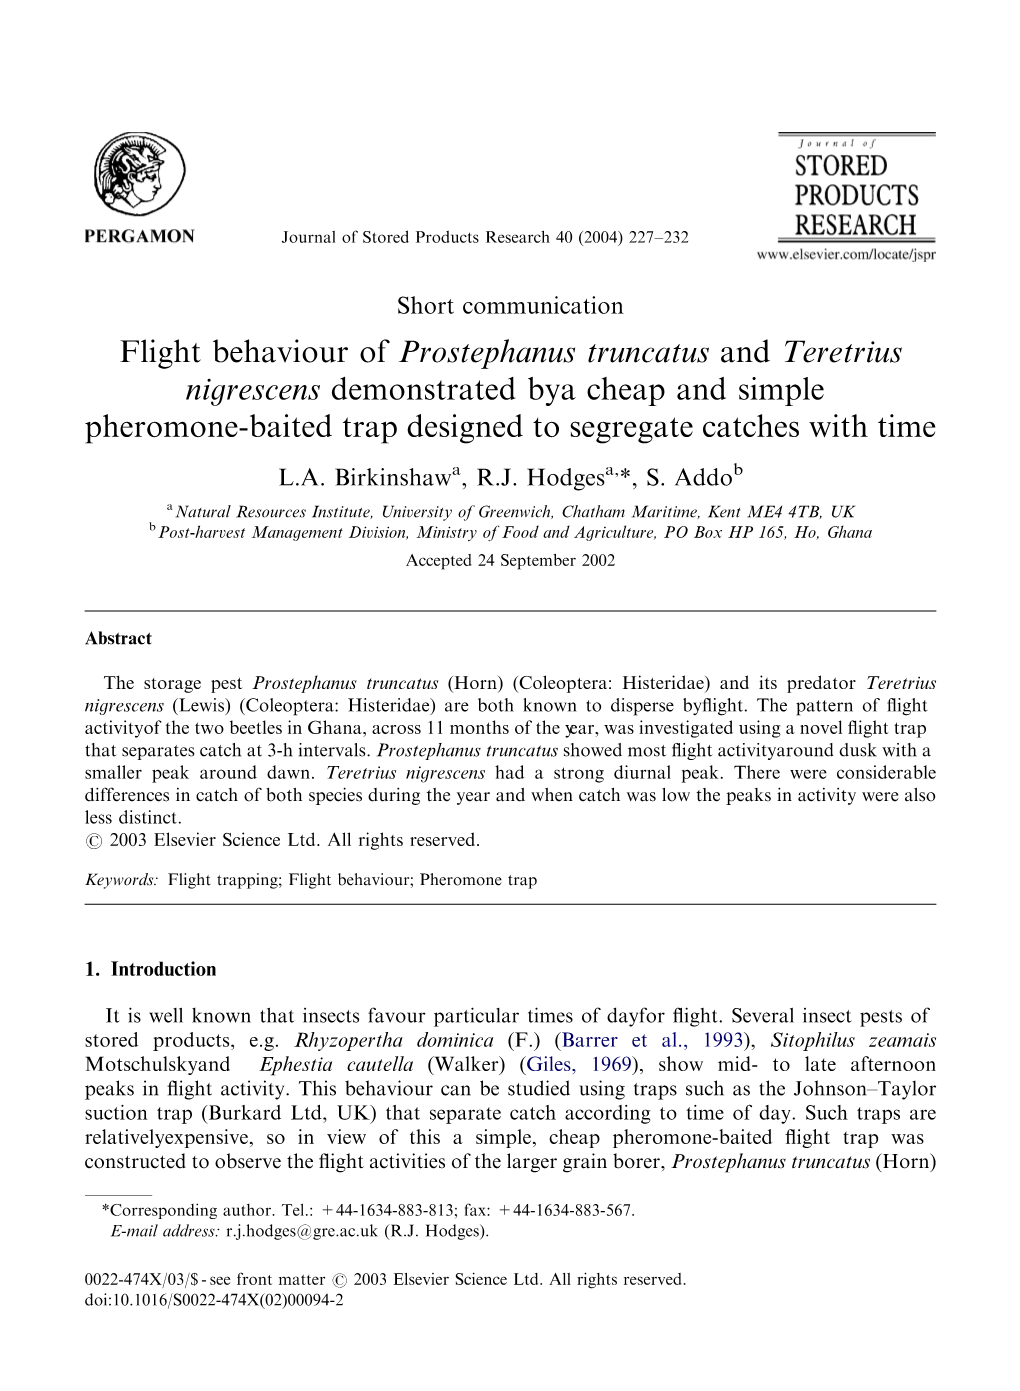 Prostephanus Truncatus and Teretrius Nigrescens Demonstrated Bya Cheap and Simple Pheromone-Baited Trap Designed to Segregate Catches with Time L.A